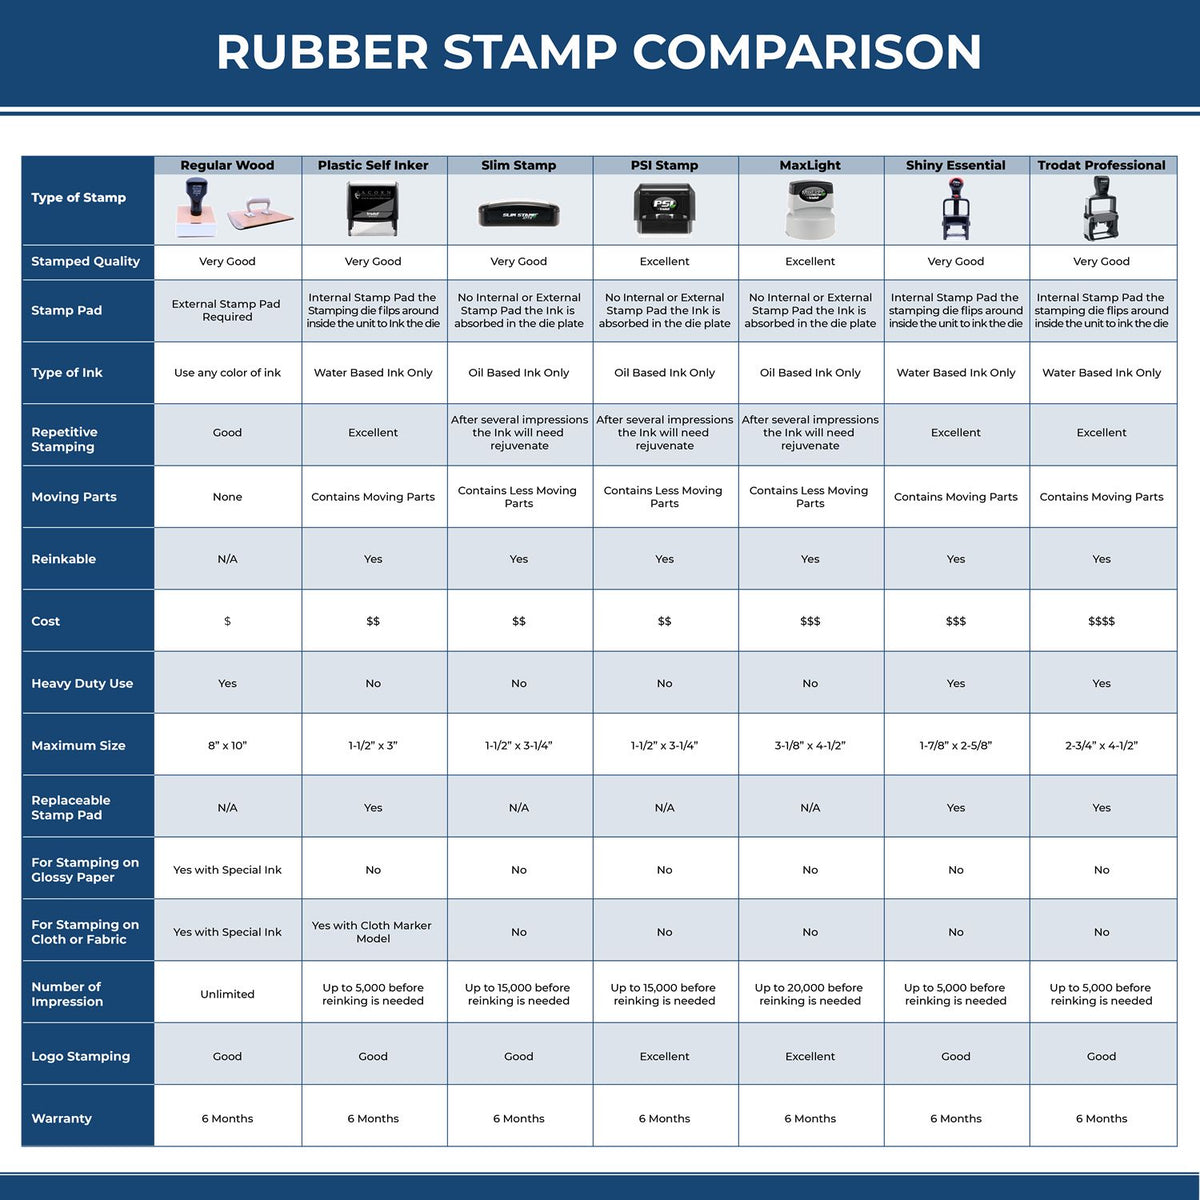 A comparison chart for the different types of mount models available for the Premium MaxLight Pre-Inked Illinois Engineering Stamp.